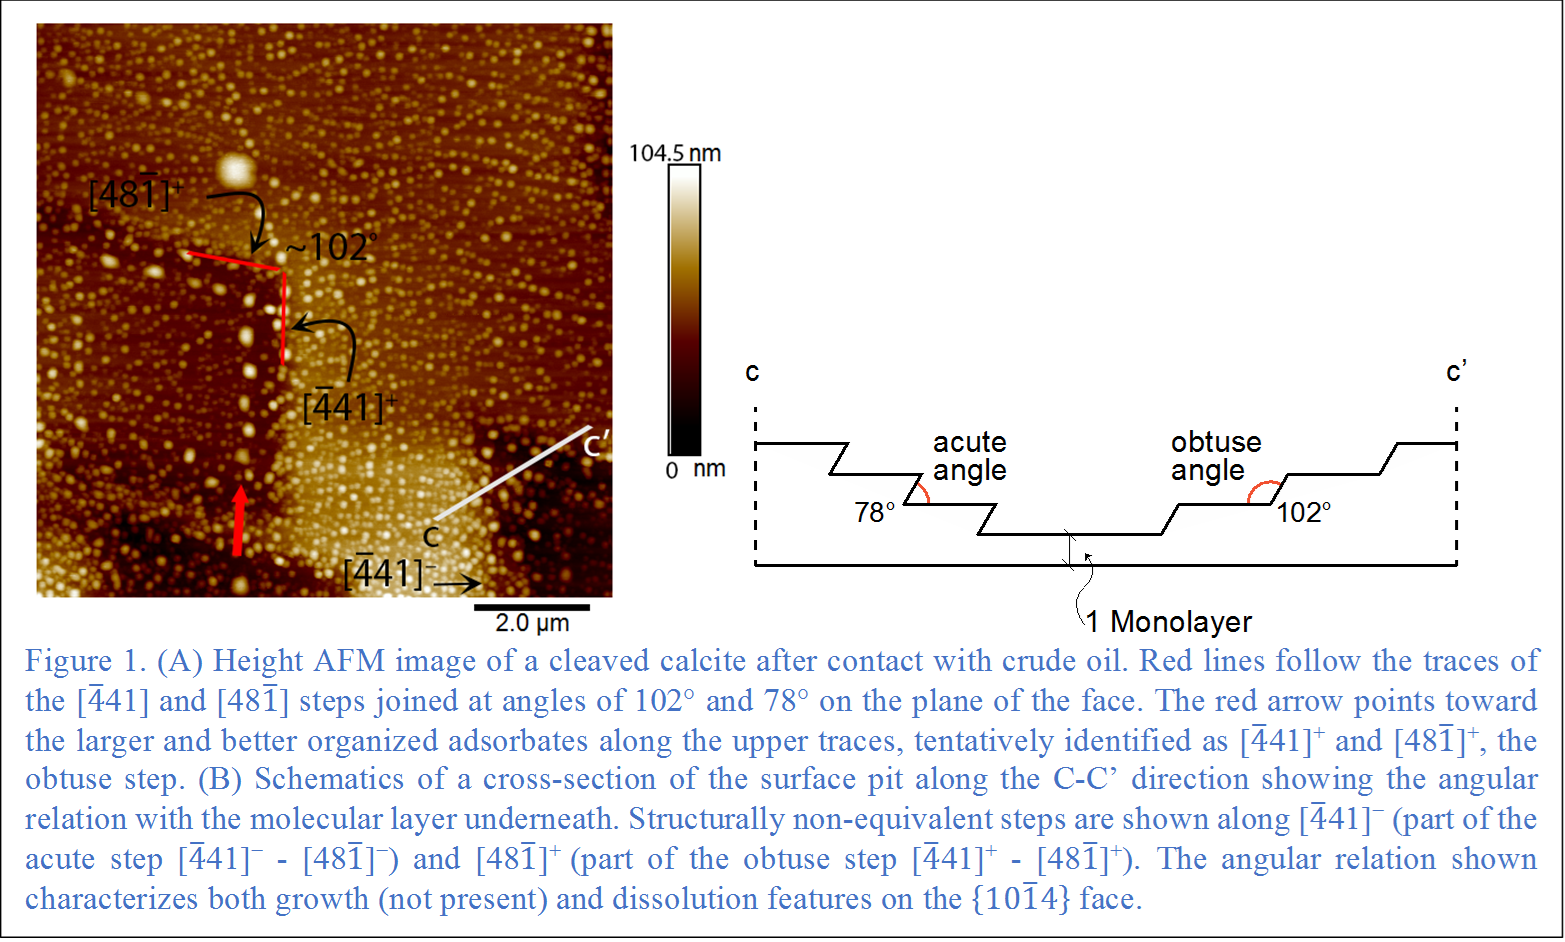 Figure 1. (A) Height AFM image of a cleaved calcite after contact with crude oil. Red lines follow the traces of the [4 ̅41] and [481 ̅] steps joined at angles of 102° and 78° on the plane of the face. The red arrow points toward the larger and better organized adsorbates along the upper traces, tentatively identified as [4 ̅41]+ and [481 ̅]+, the obtuse step. (B) Schematics of a cross-section of the surface pit along the C-C’ direction showing the angular relation with the molecular layer underneath. Structurally non-equivalent steps are shown along [4 ̅41]− (part of the acute step [4 ̅41]− - [481 ̅]−) and [481 ̅]+ (part of the obtuse step [4 ̅41]+ - [481 ̅]+). The angular relation shown characterizes both growth (not present) and dissolution features on the {101 ̅4} face.